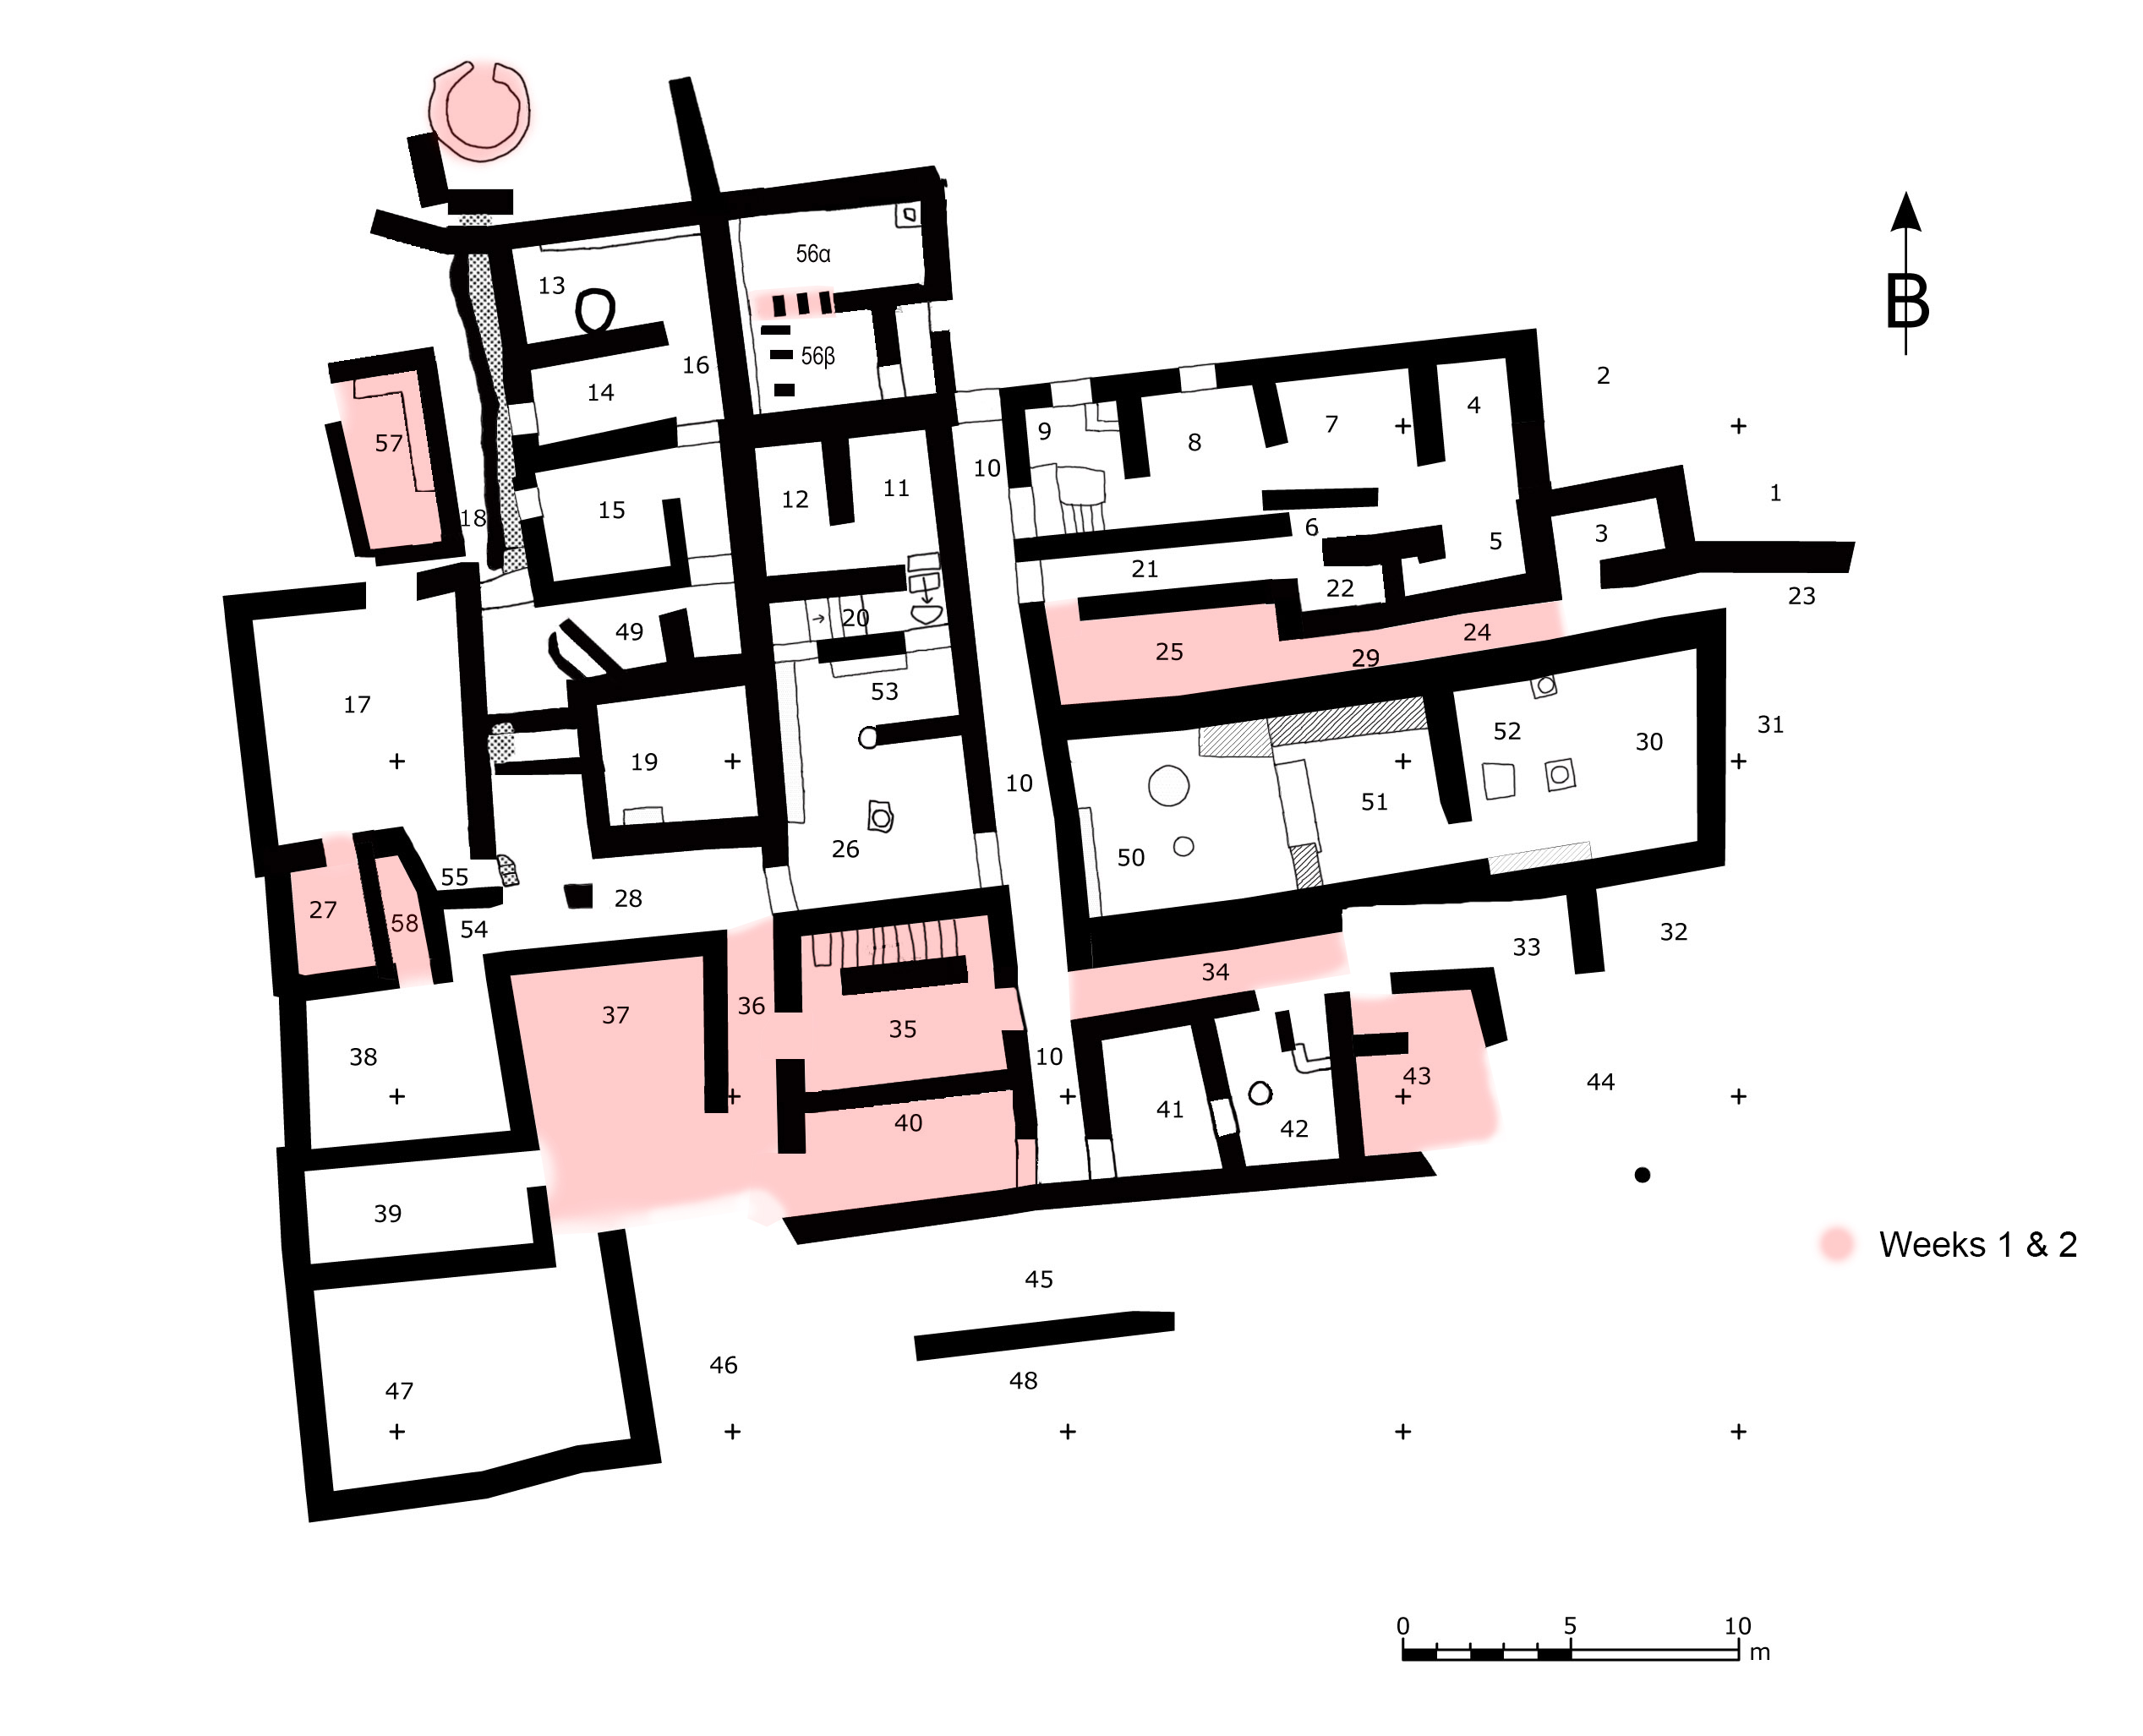 Areas of investigation, Weeks 1 and 2